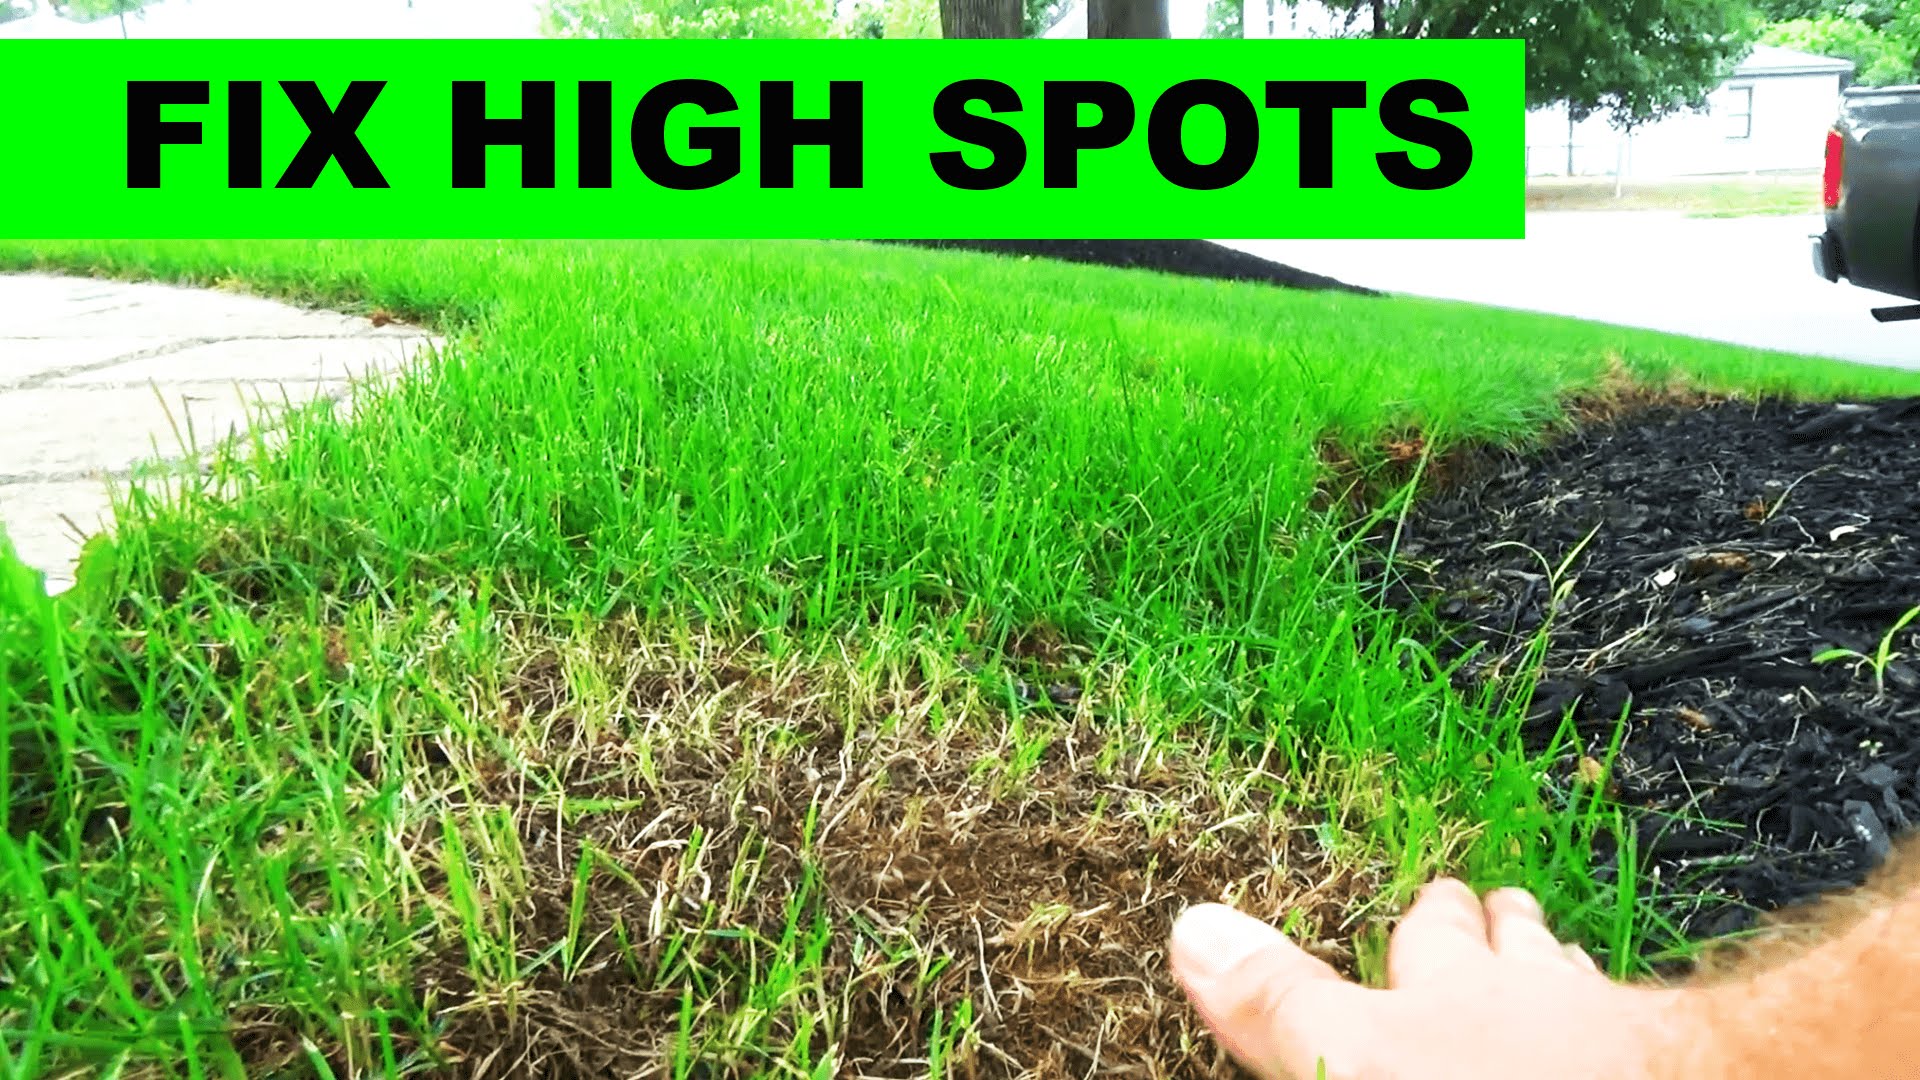 How to fix high spots in your lawn - YouTube